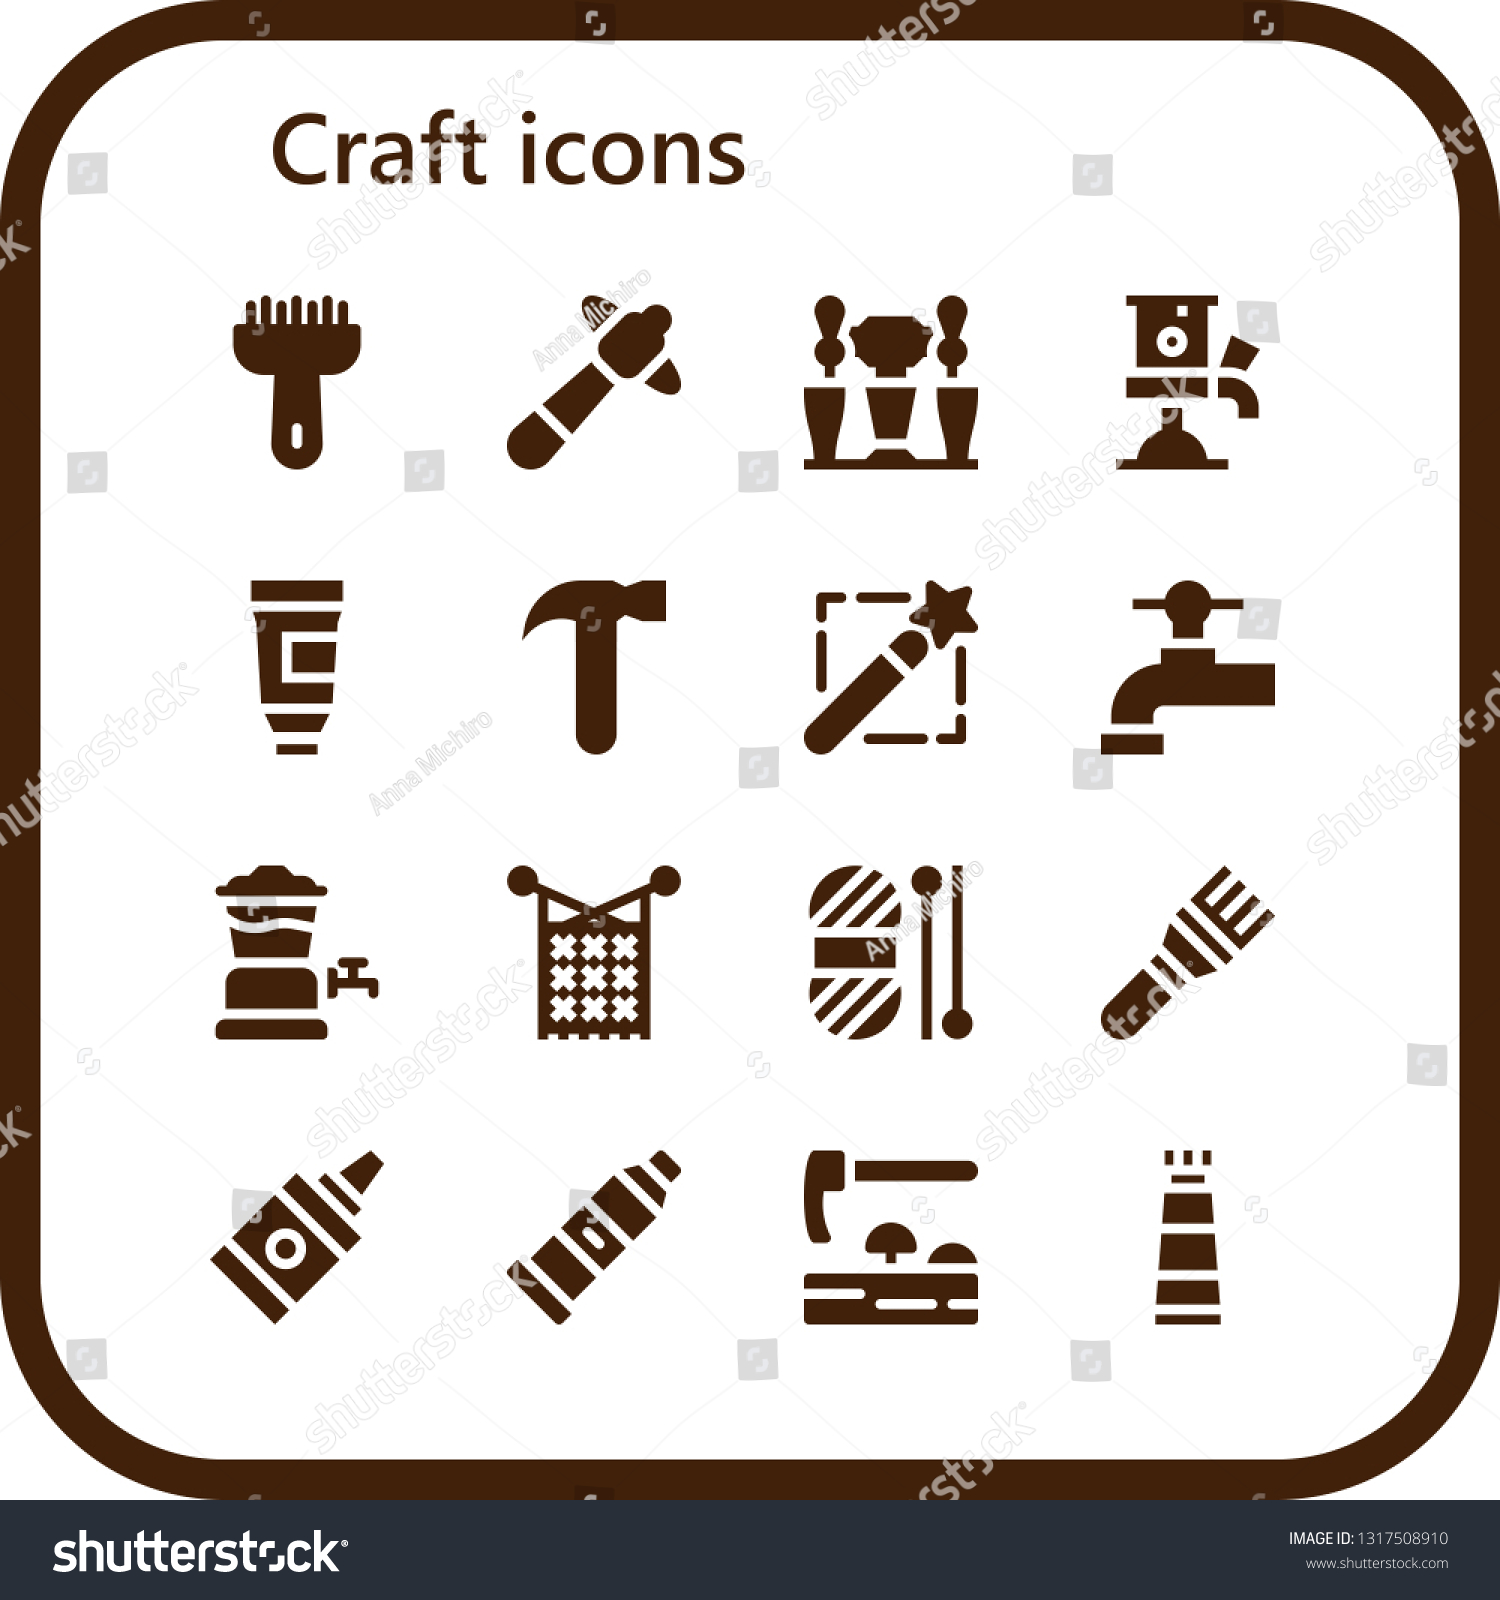 SVG of craft icon set. 16 filled craft icons.  Simple modern icons about  - Brush, Hammer, Beer tap, Paint tube, Magic wand, Knit, Wool, Glue, Adze svg